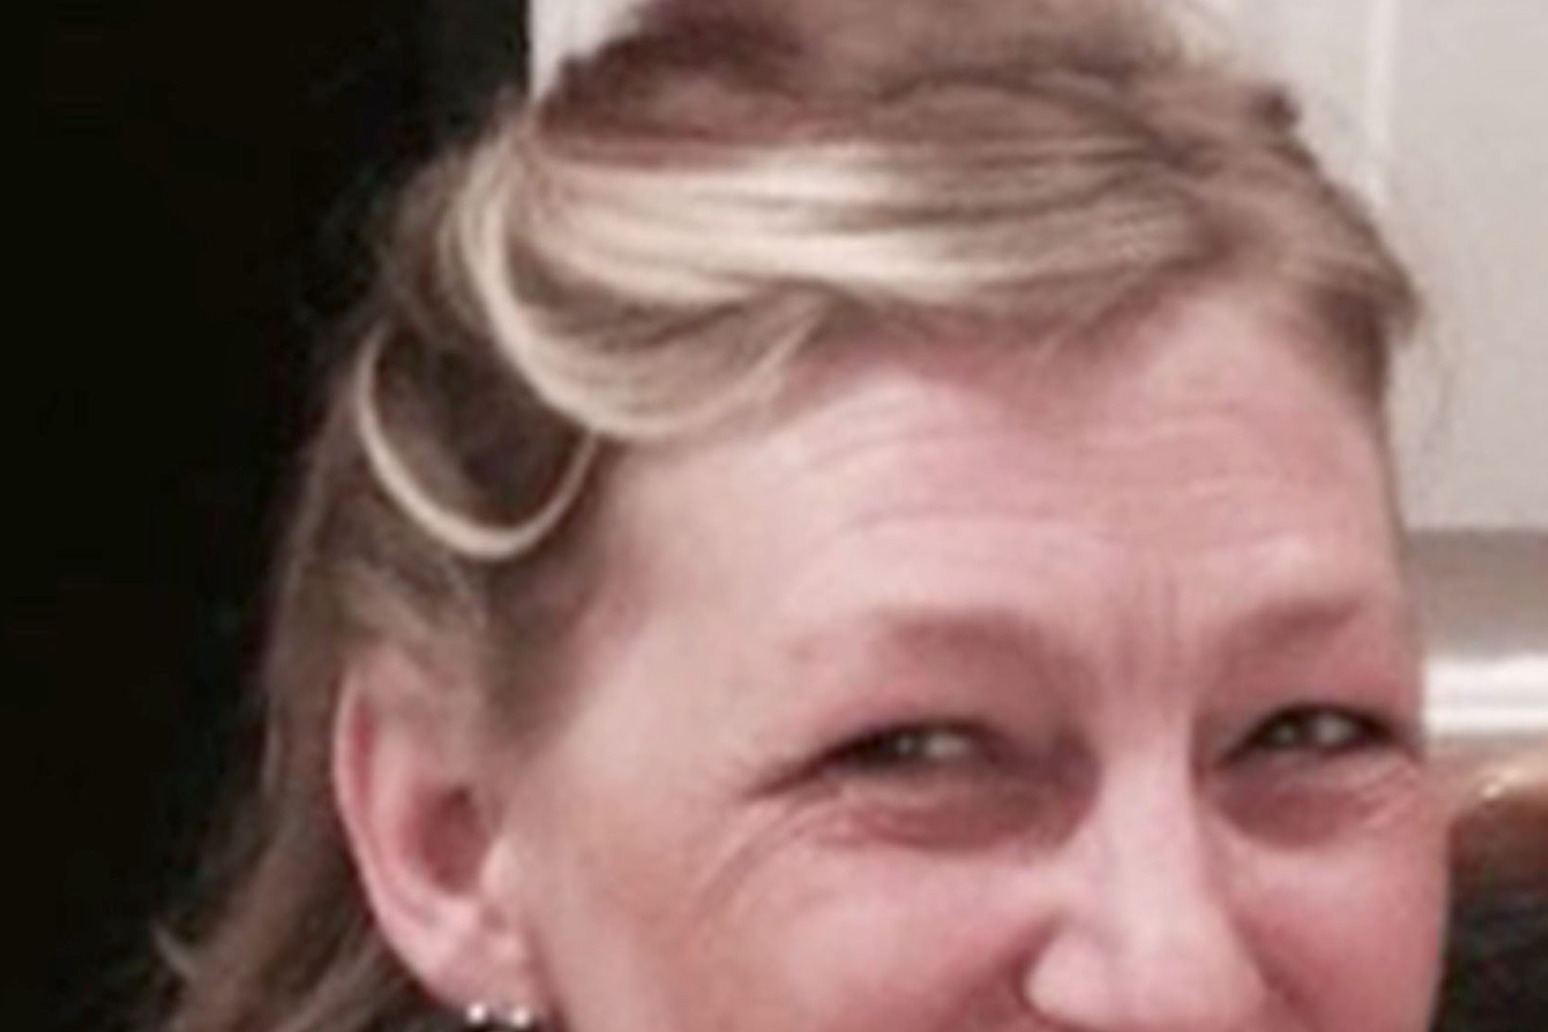 A public inquiry will be held following the death of 44-year-old Dawn Sturgess 